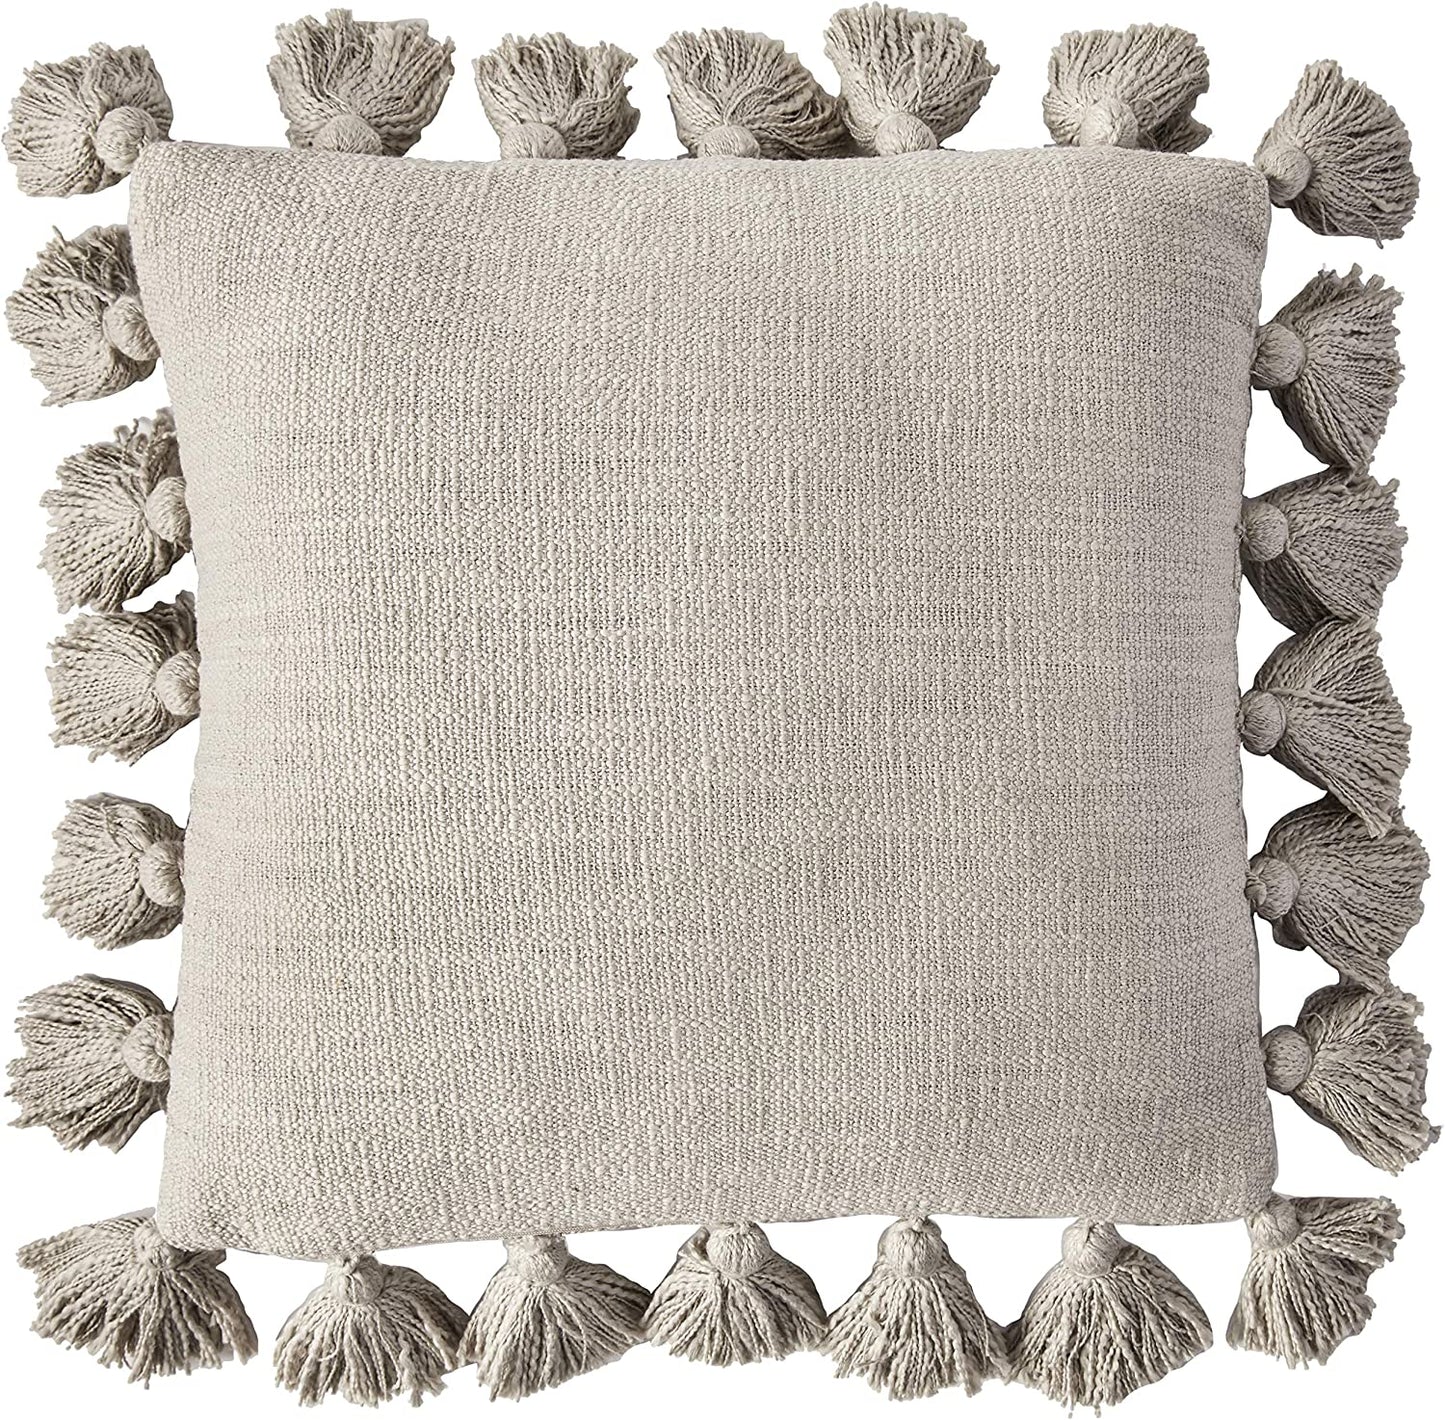 18" Square Cotton Pillow With Tassels